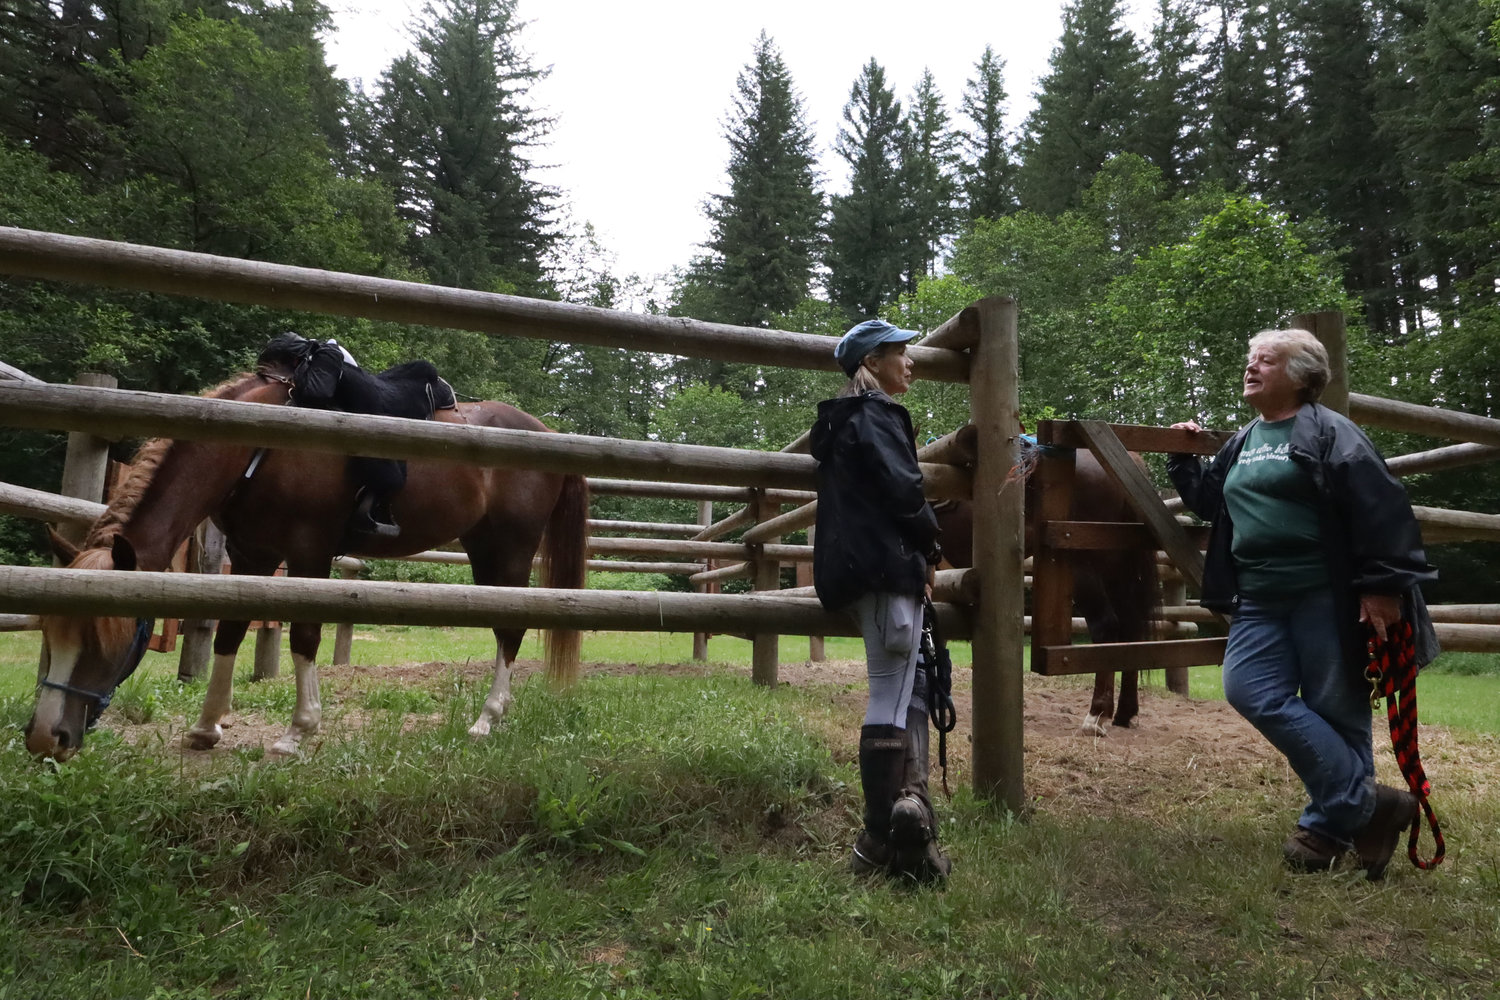 Left to right: Tani Bates and Barbra Thomas stop to visit while their horses are in the horse paddock at Rock Creek Horse Camp in Yacolt June 25.